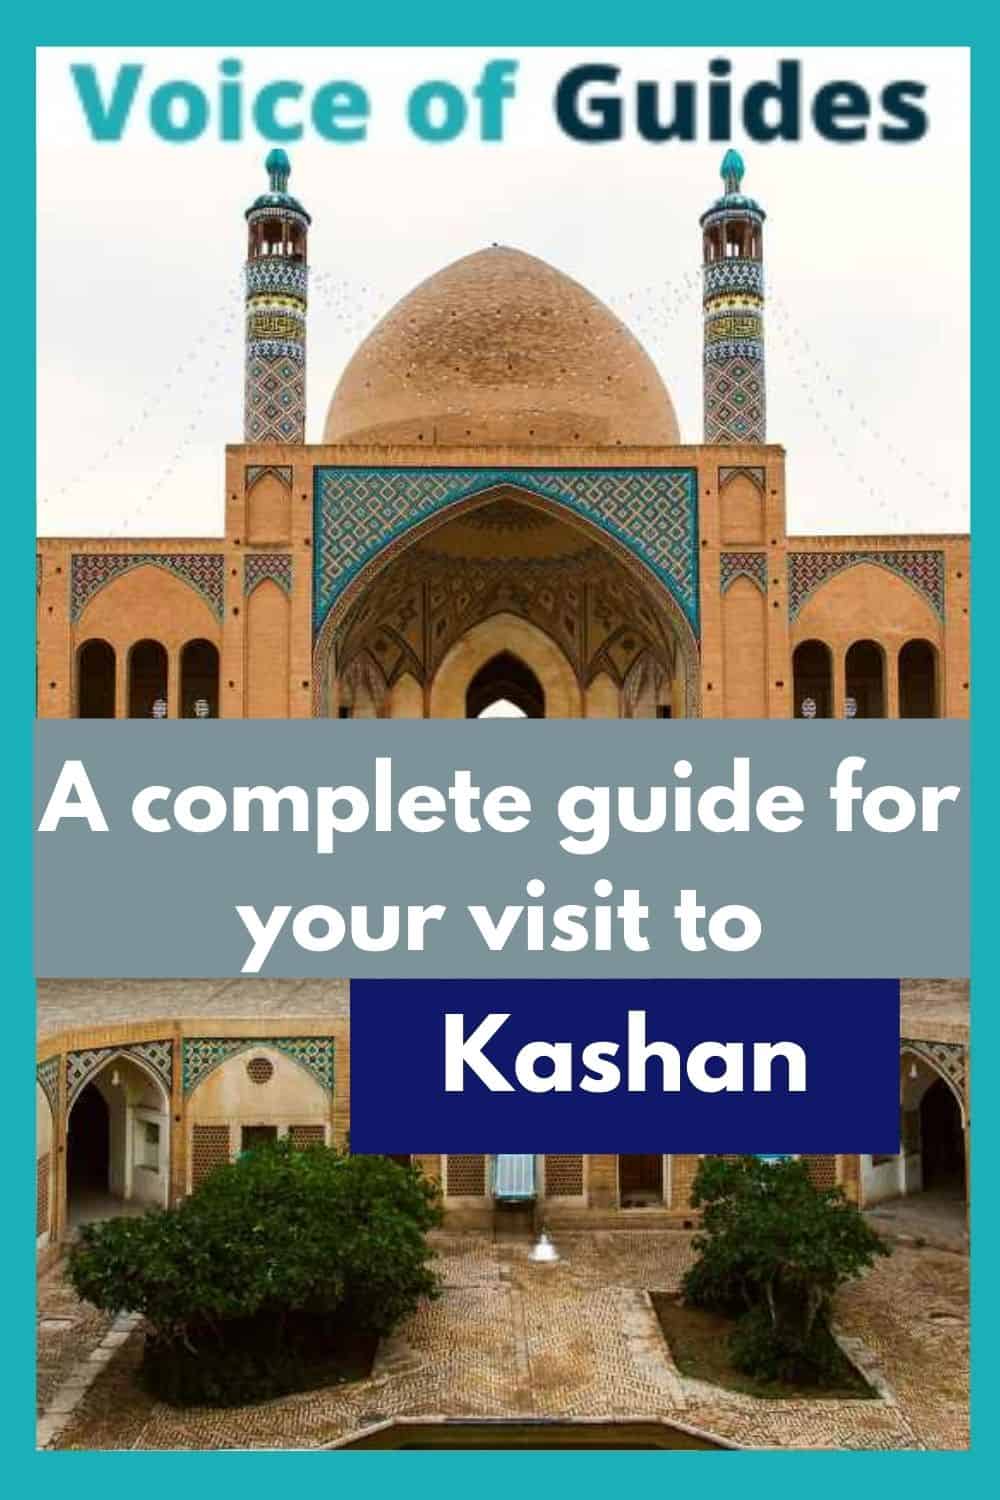 ALL YOU NEED TO KNOW TO VISIT KASHAN - Voice of Guides